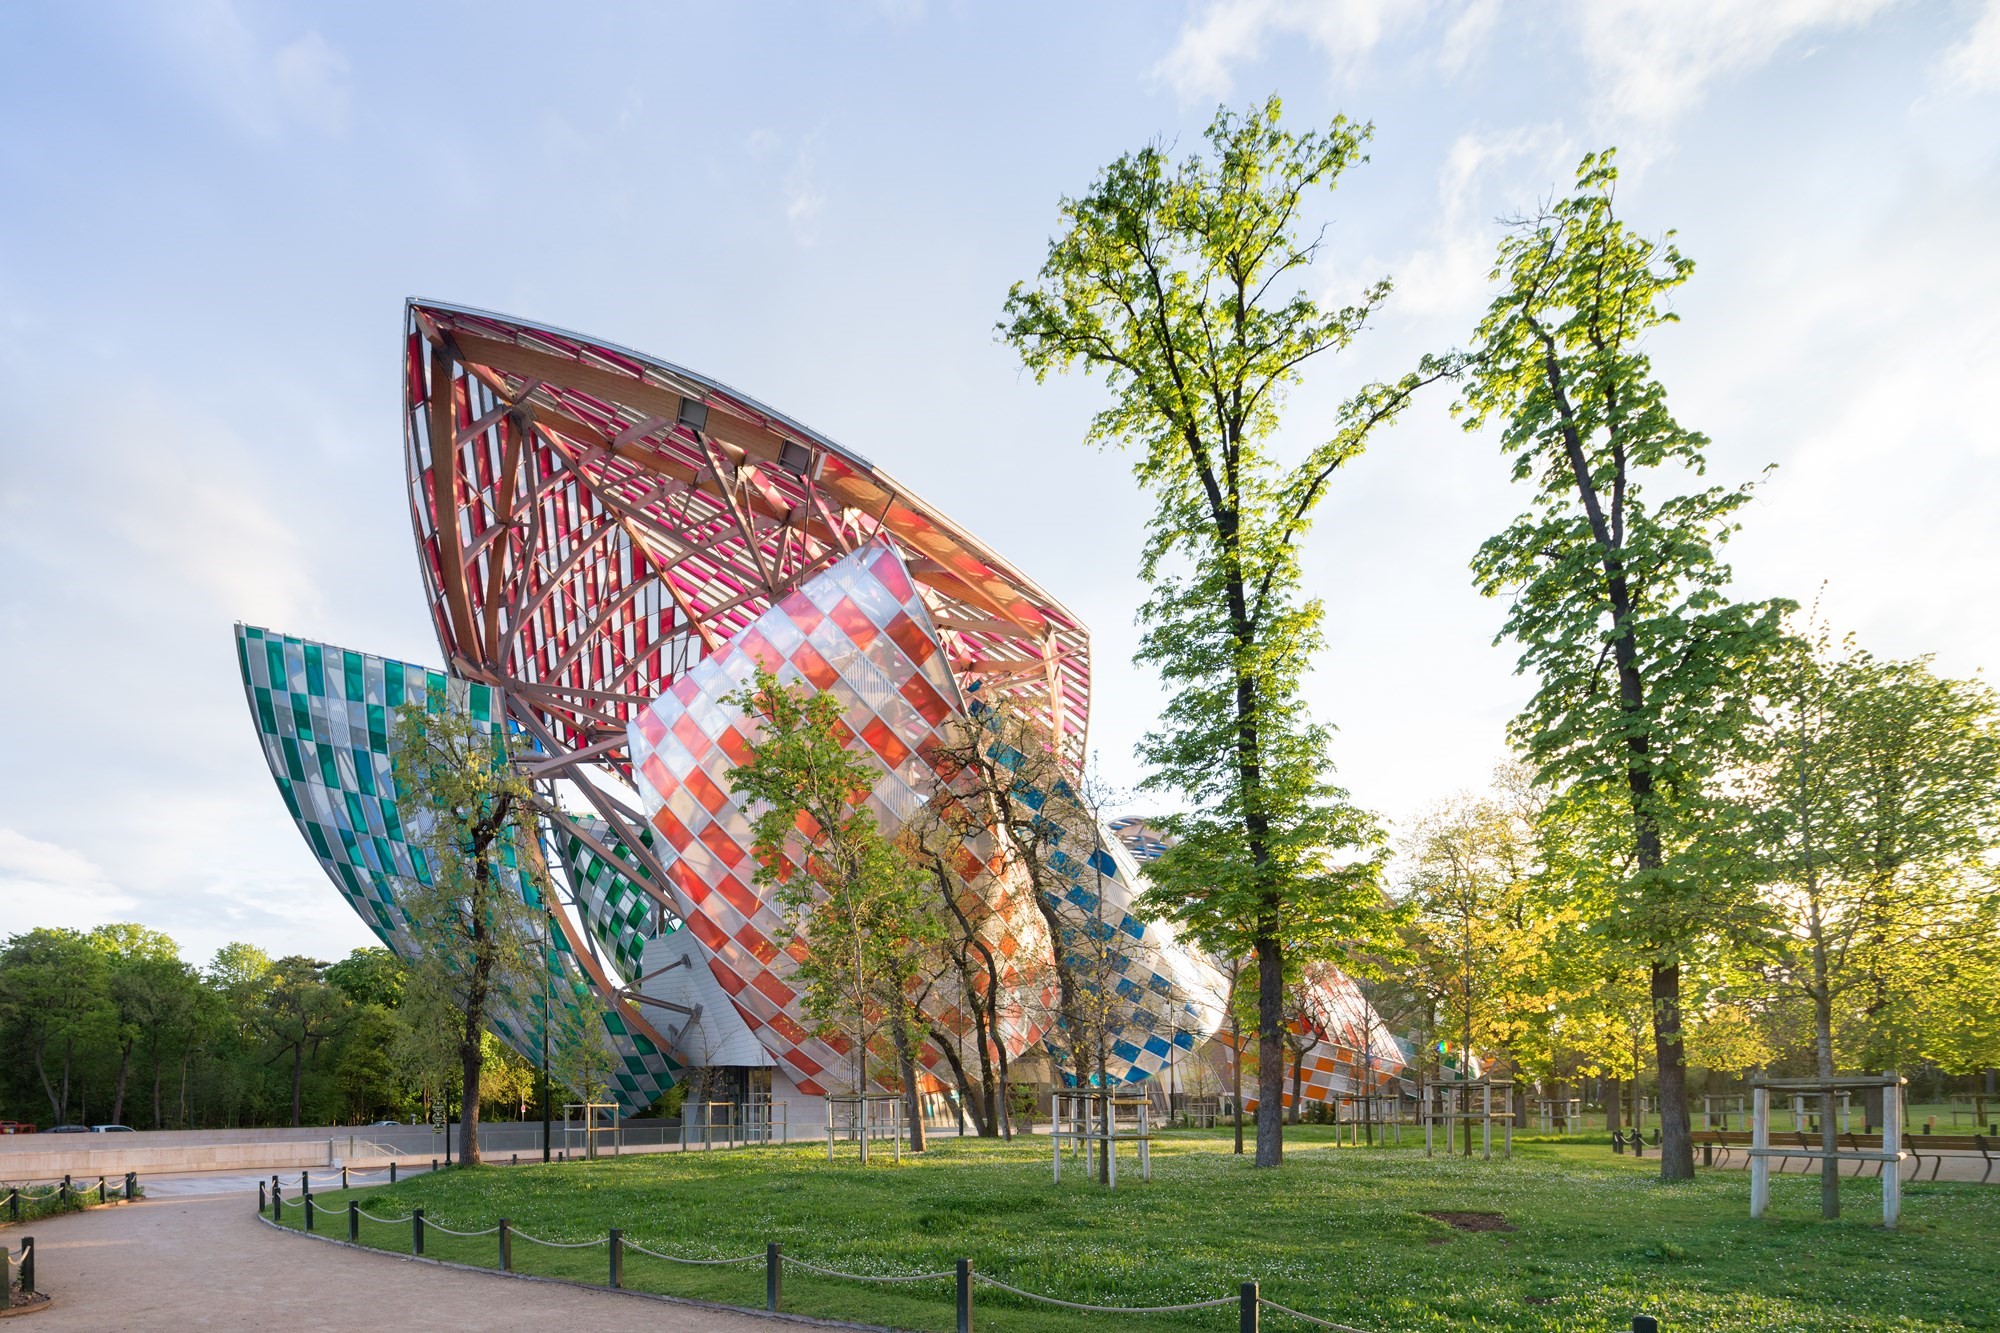 Environmental Activists Target Fondation Louis Vuitton for French